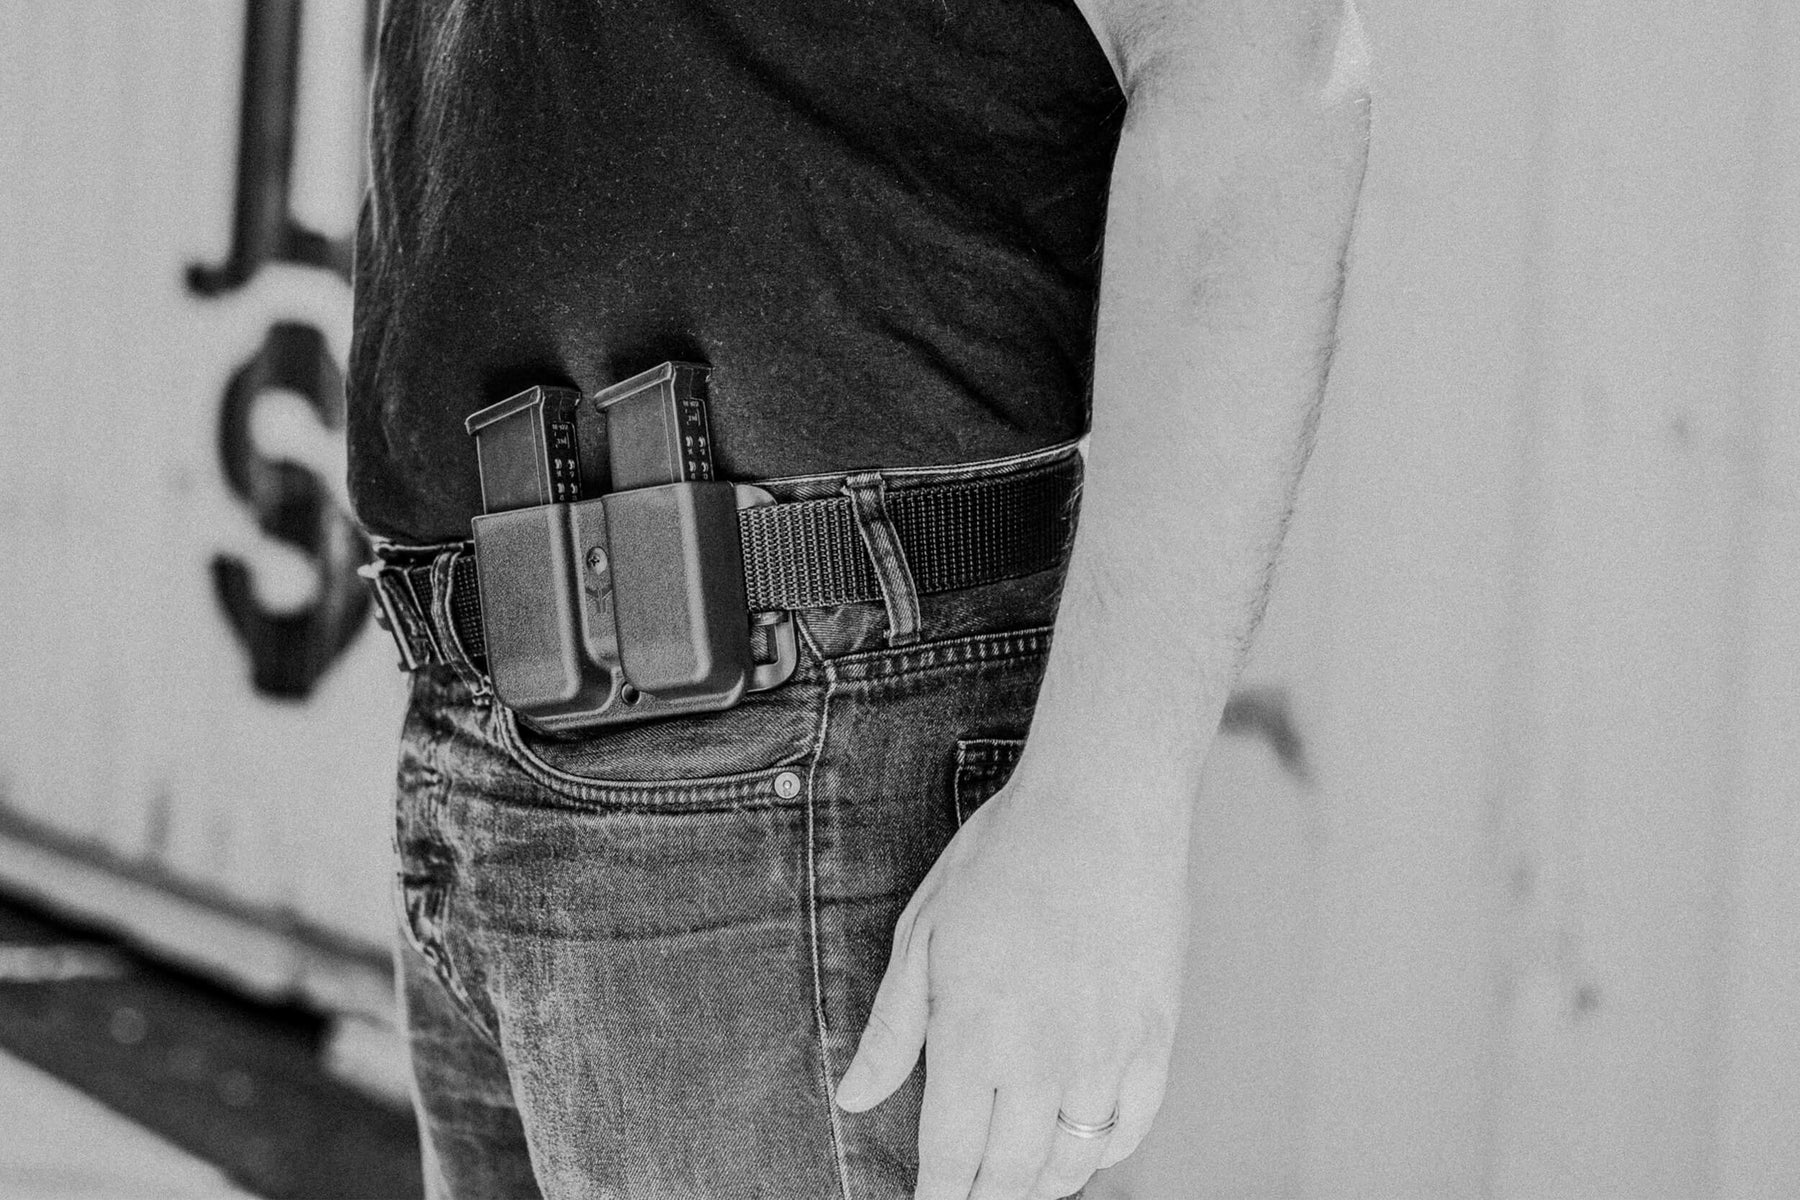 Person wearing Signature Double Mag Pouch including Adjustable Stingray Loop Belt Attachment with Glock 9/40 Handgun Magazines mounted onto Ultimate Carry Gun Belt with Ratcheting Belt Buckle